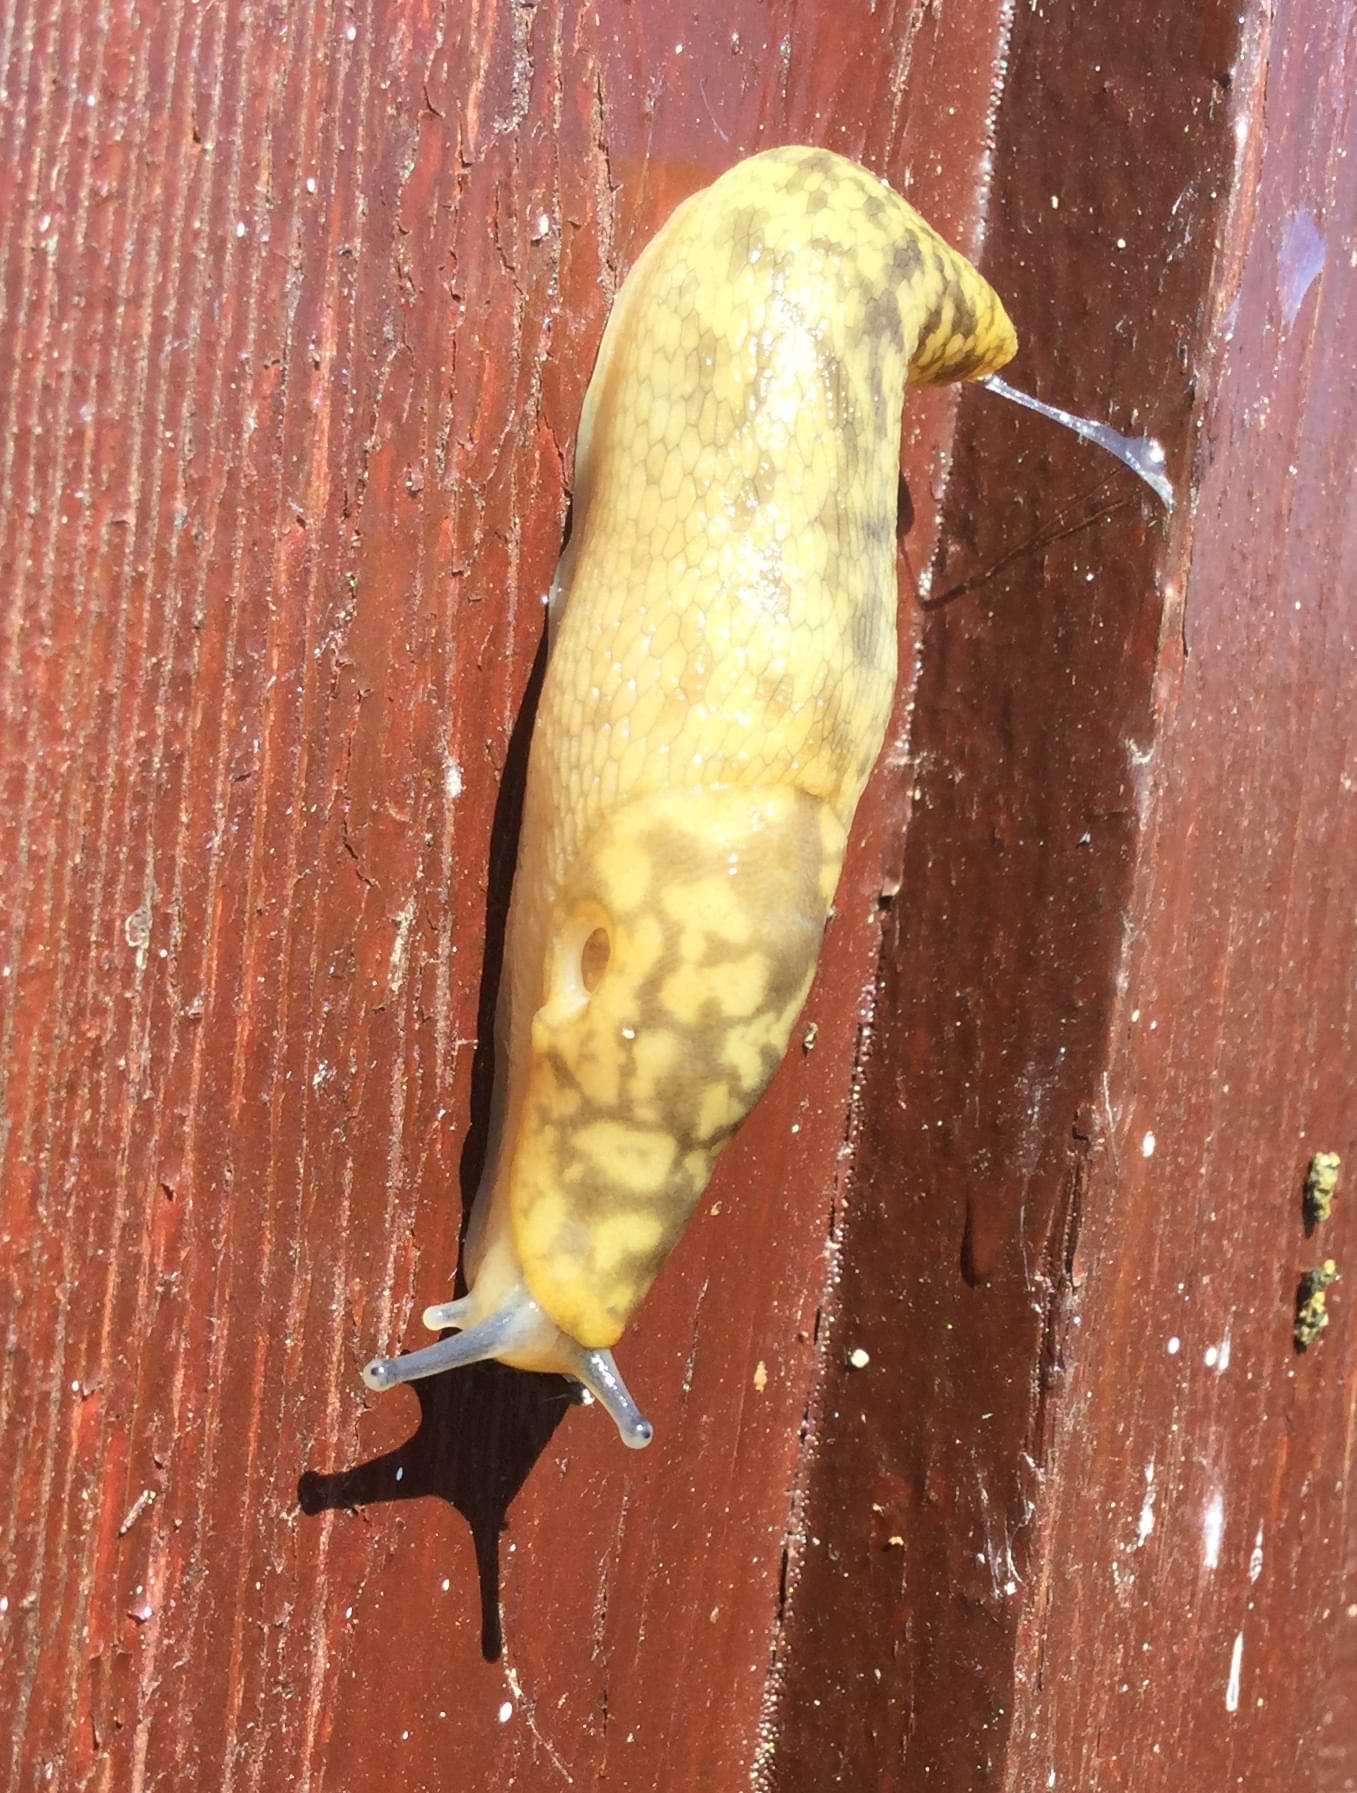 The same slug from a different angle. Visible here is a small round hole on the right side of the slug's body, which is where it breathes from. The slug has also left behind a string of thick clear mucus, that is still partially attached to its tail-end.